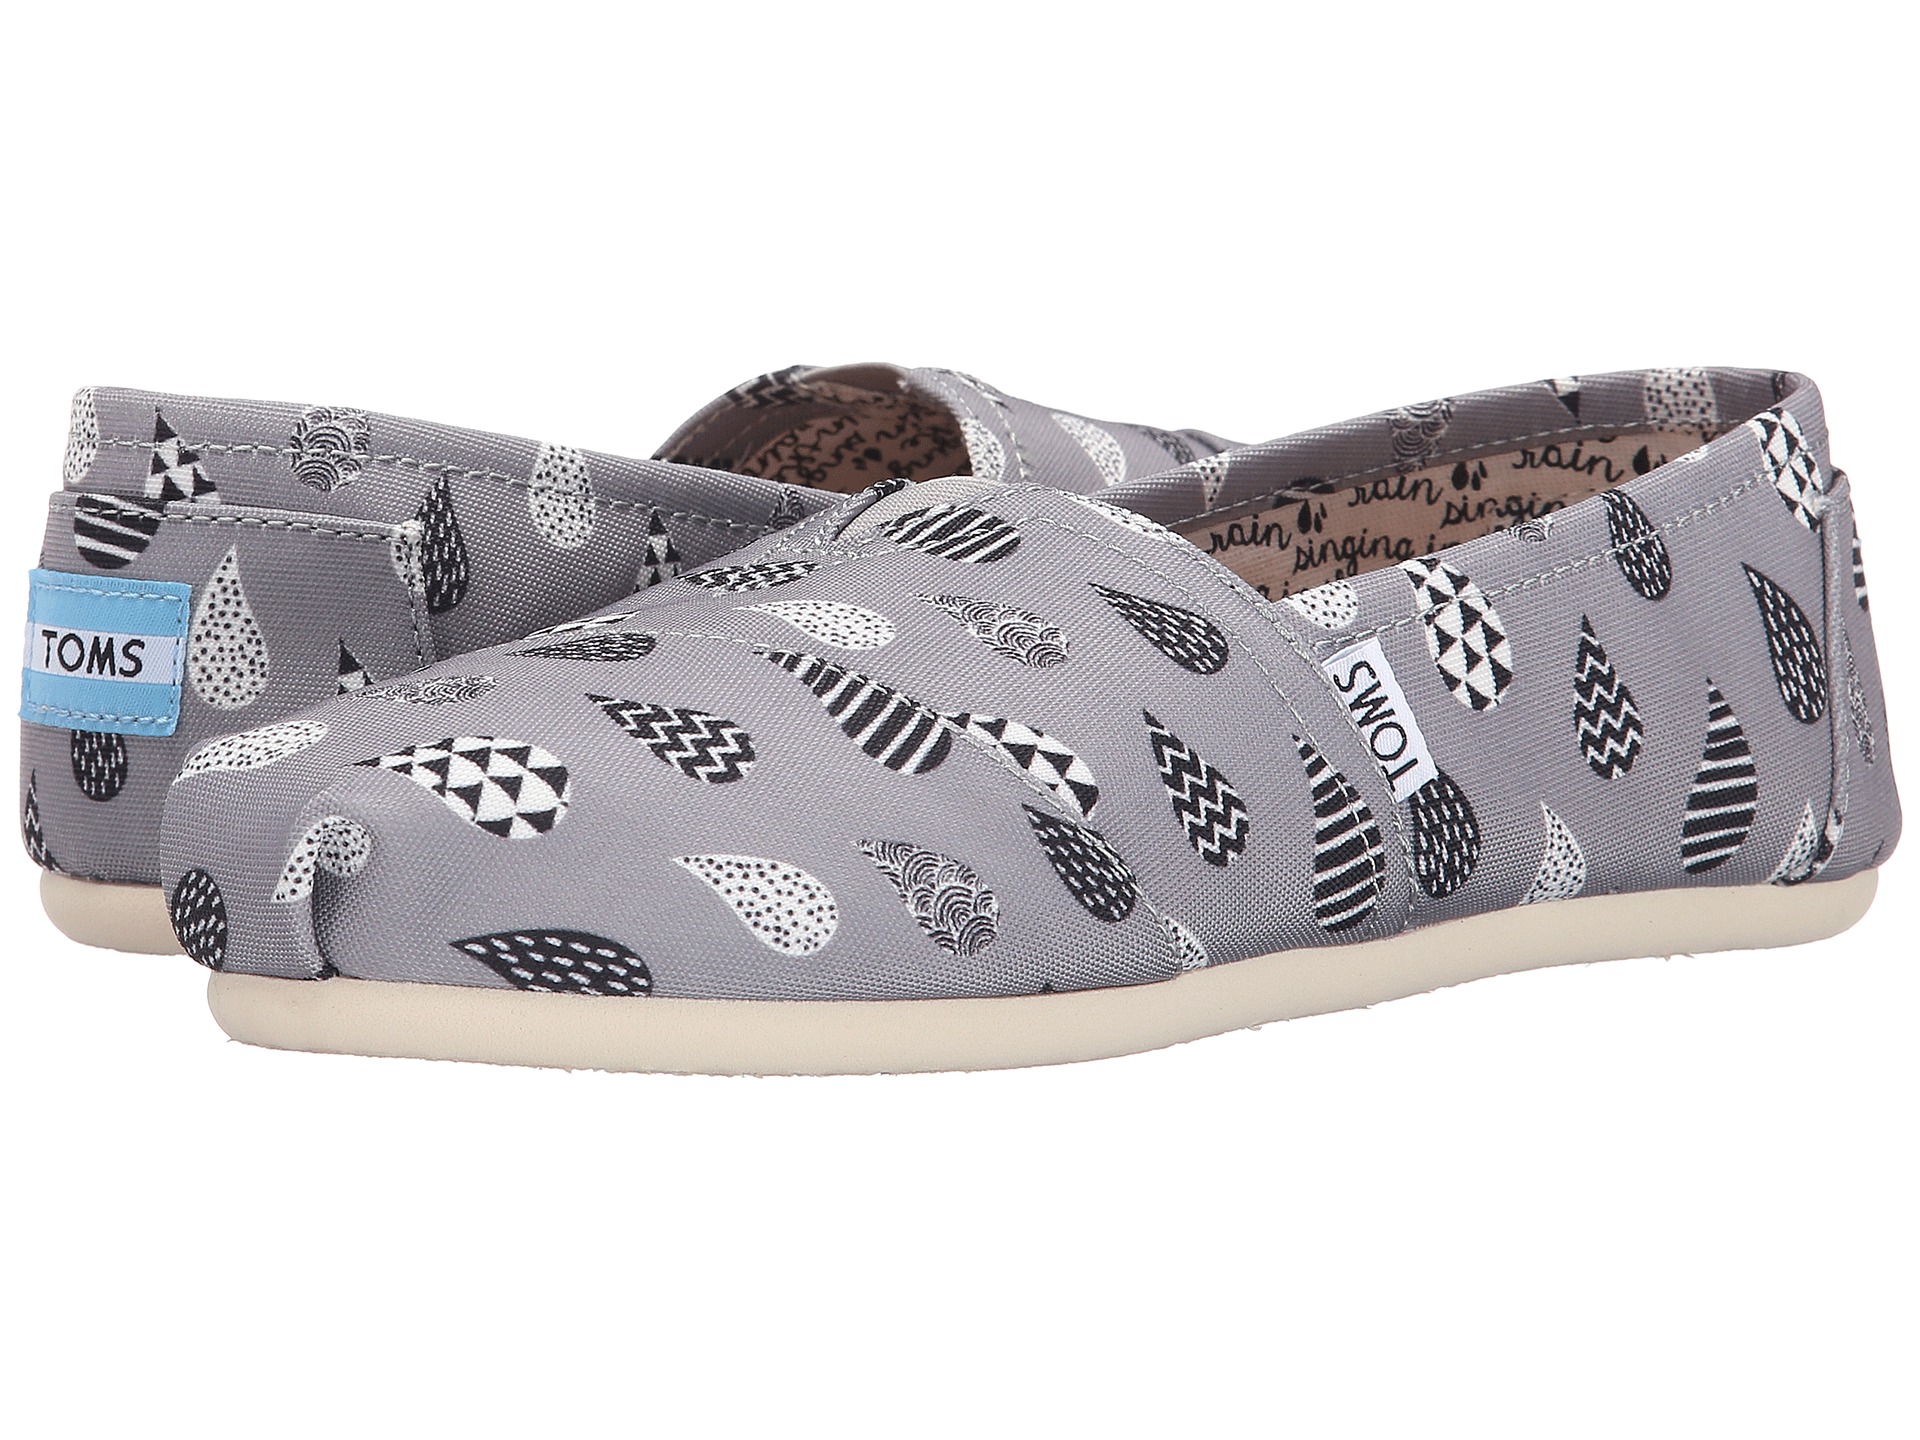 Toms Shoes for the Whole Family – As Low As $14.40! Free shipping! New styles added!